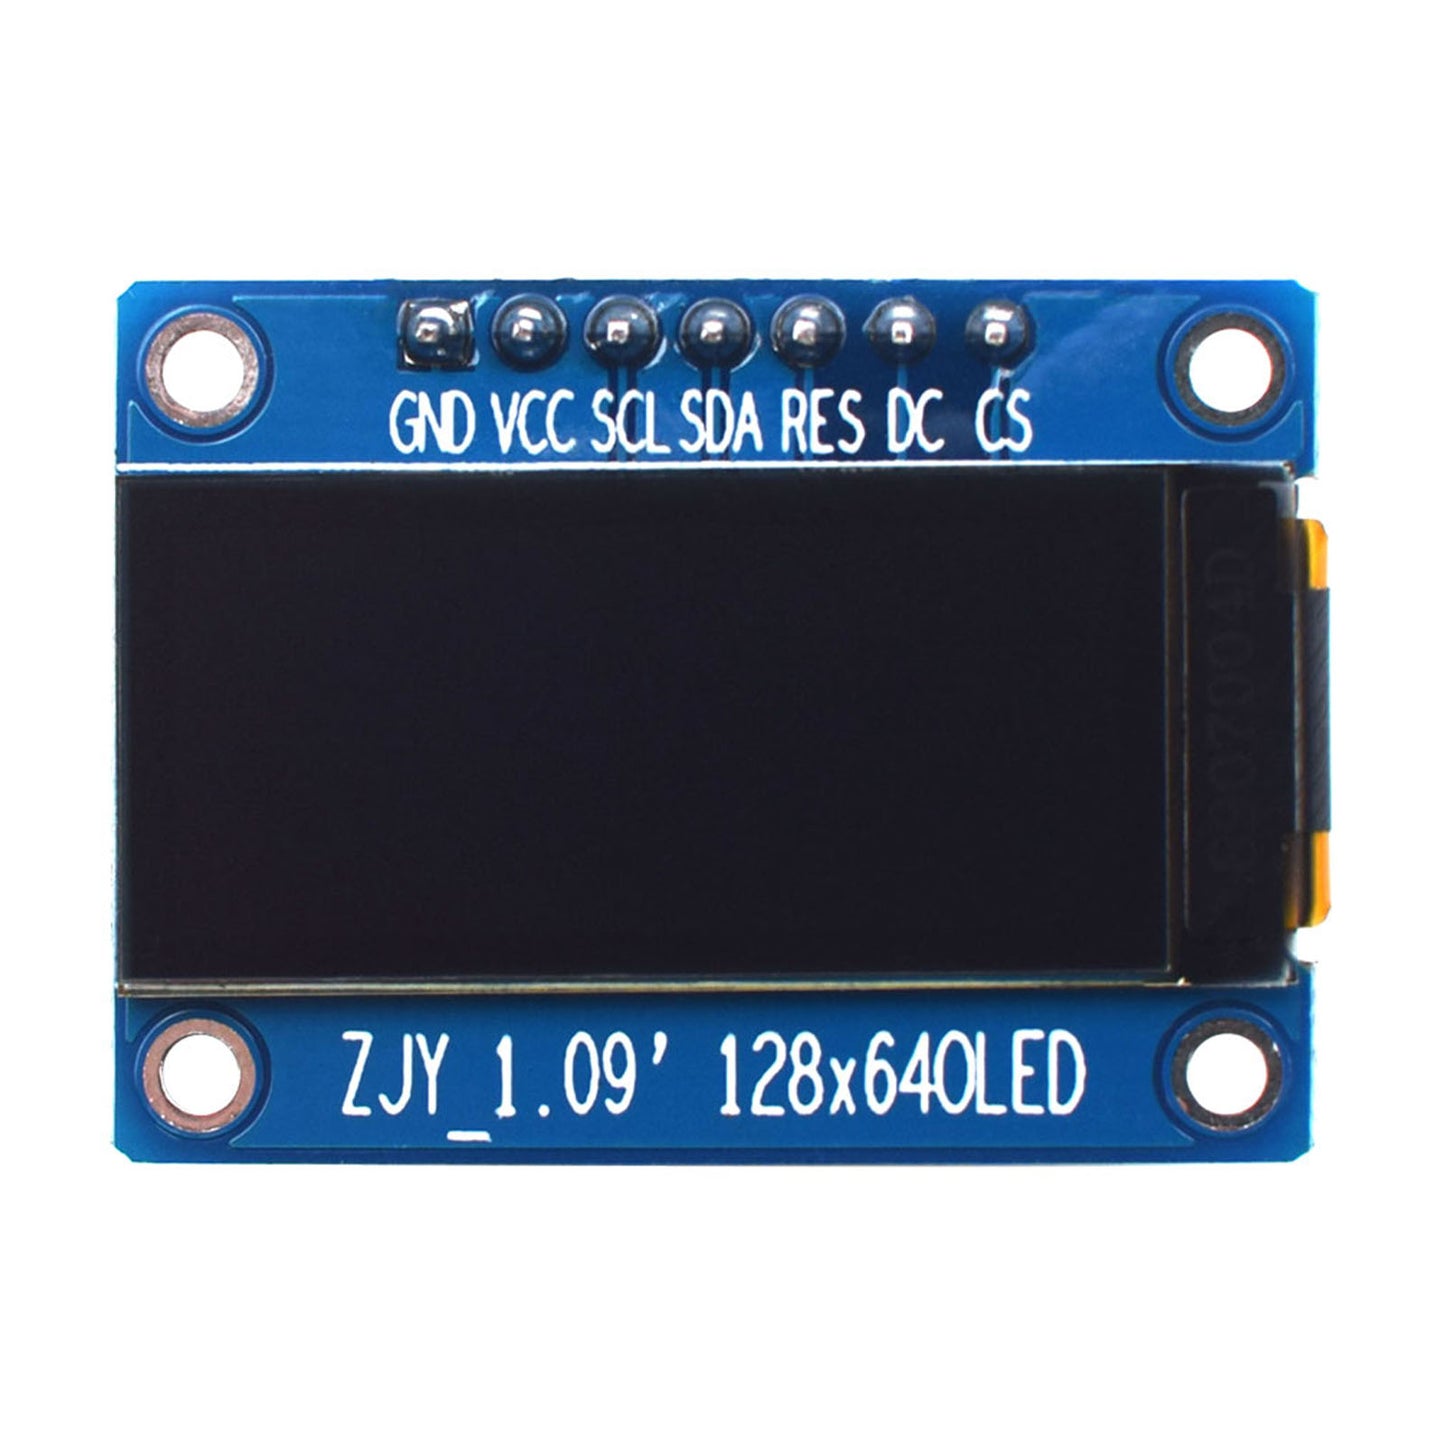 1.09 inch OLED graphic display module on white background